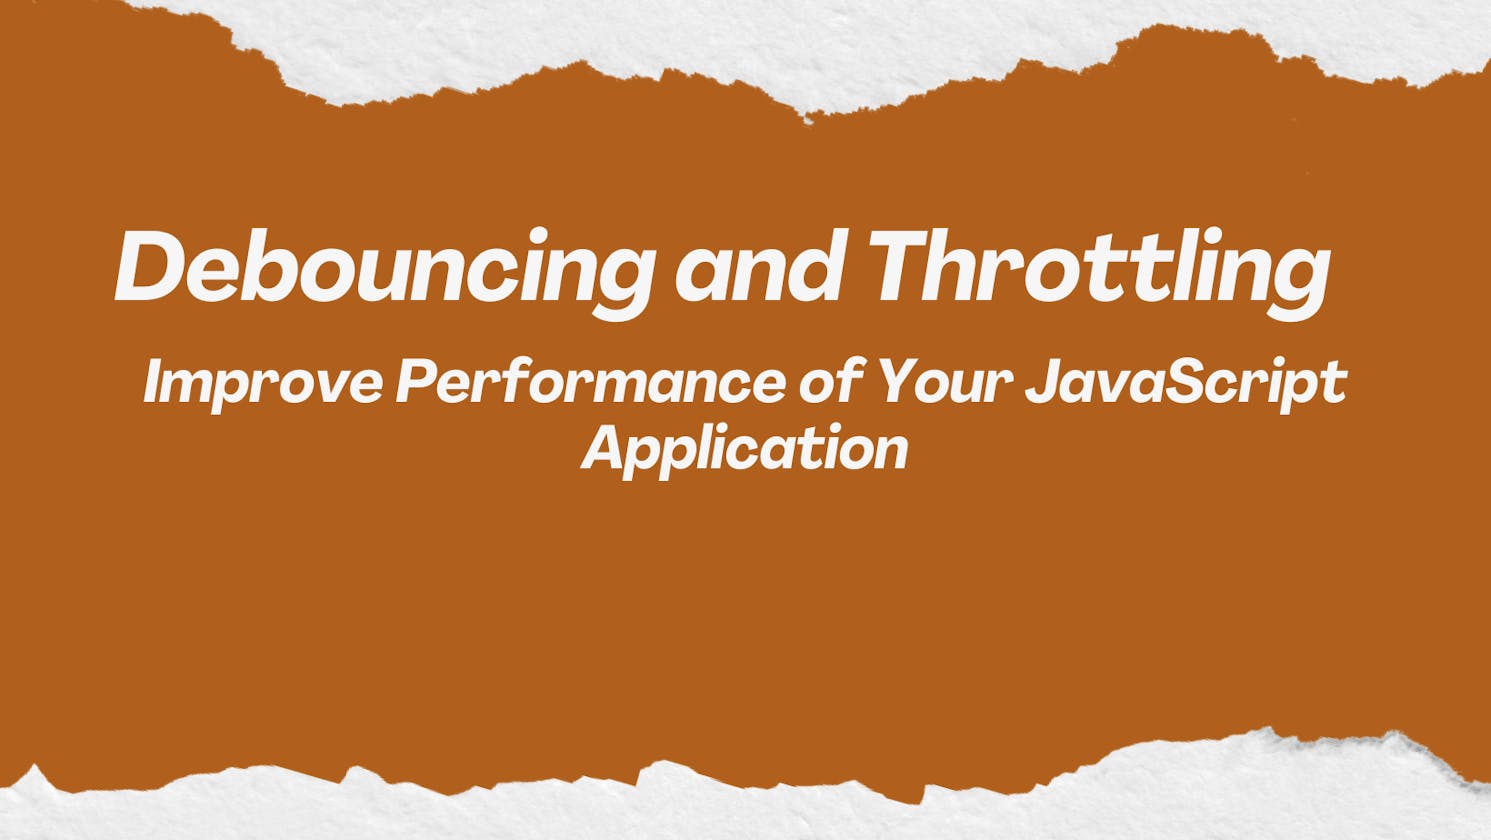 Debouncing and Throttling: Improve Performance of Your JavaScript Application